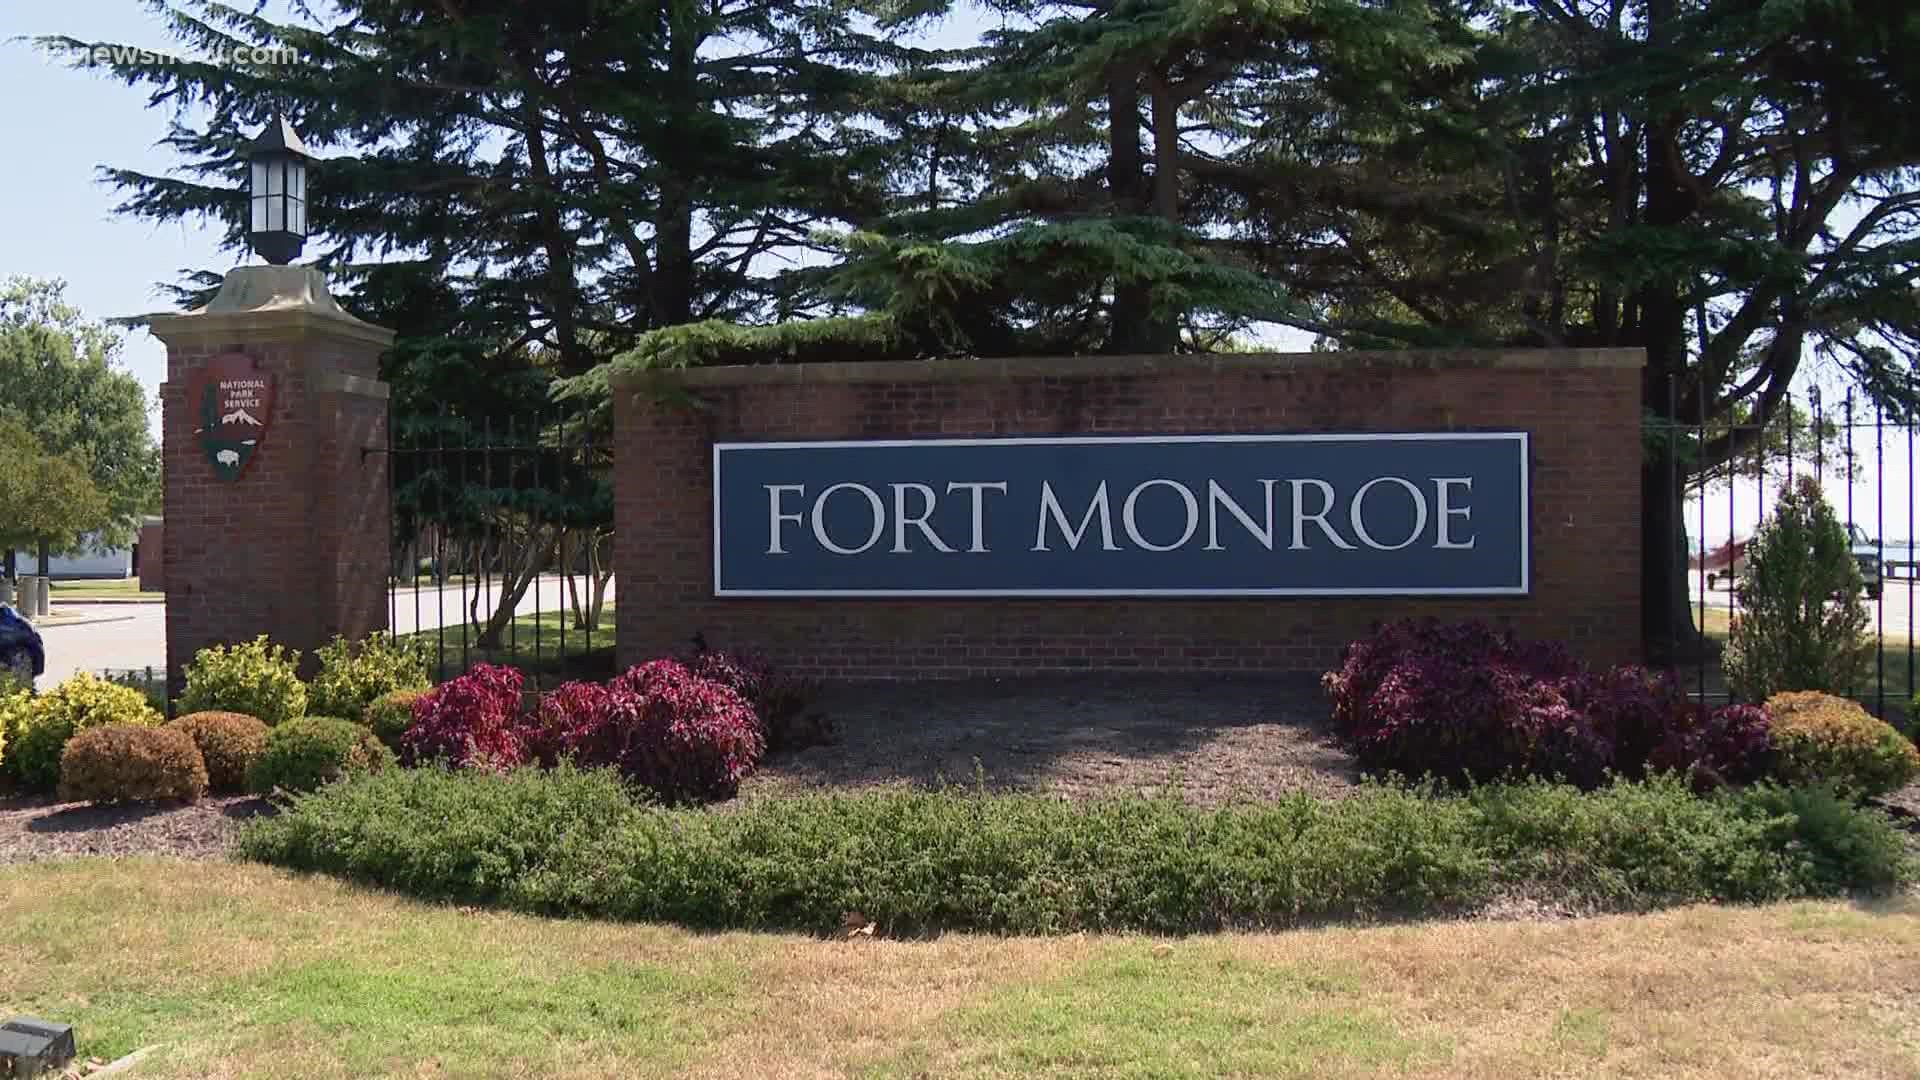 More than a decade later, leaders with the Fort Monroe Authority are finally seeing their long-term goals of repurposing historic buildings begin the next phase.